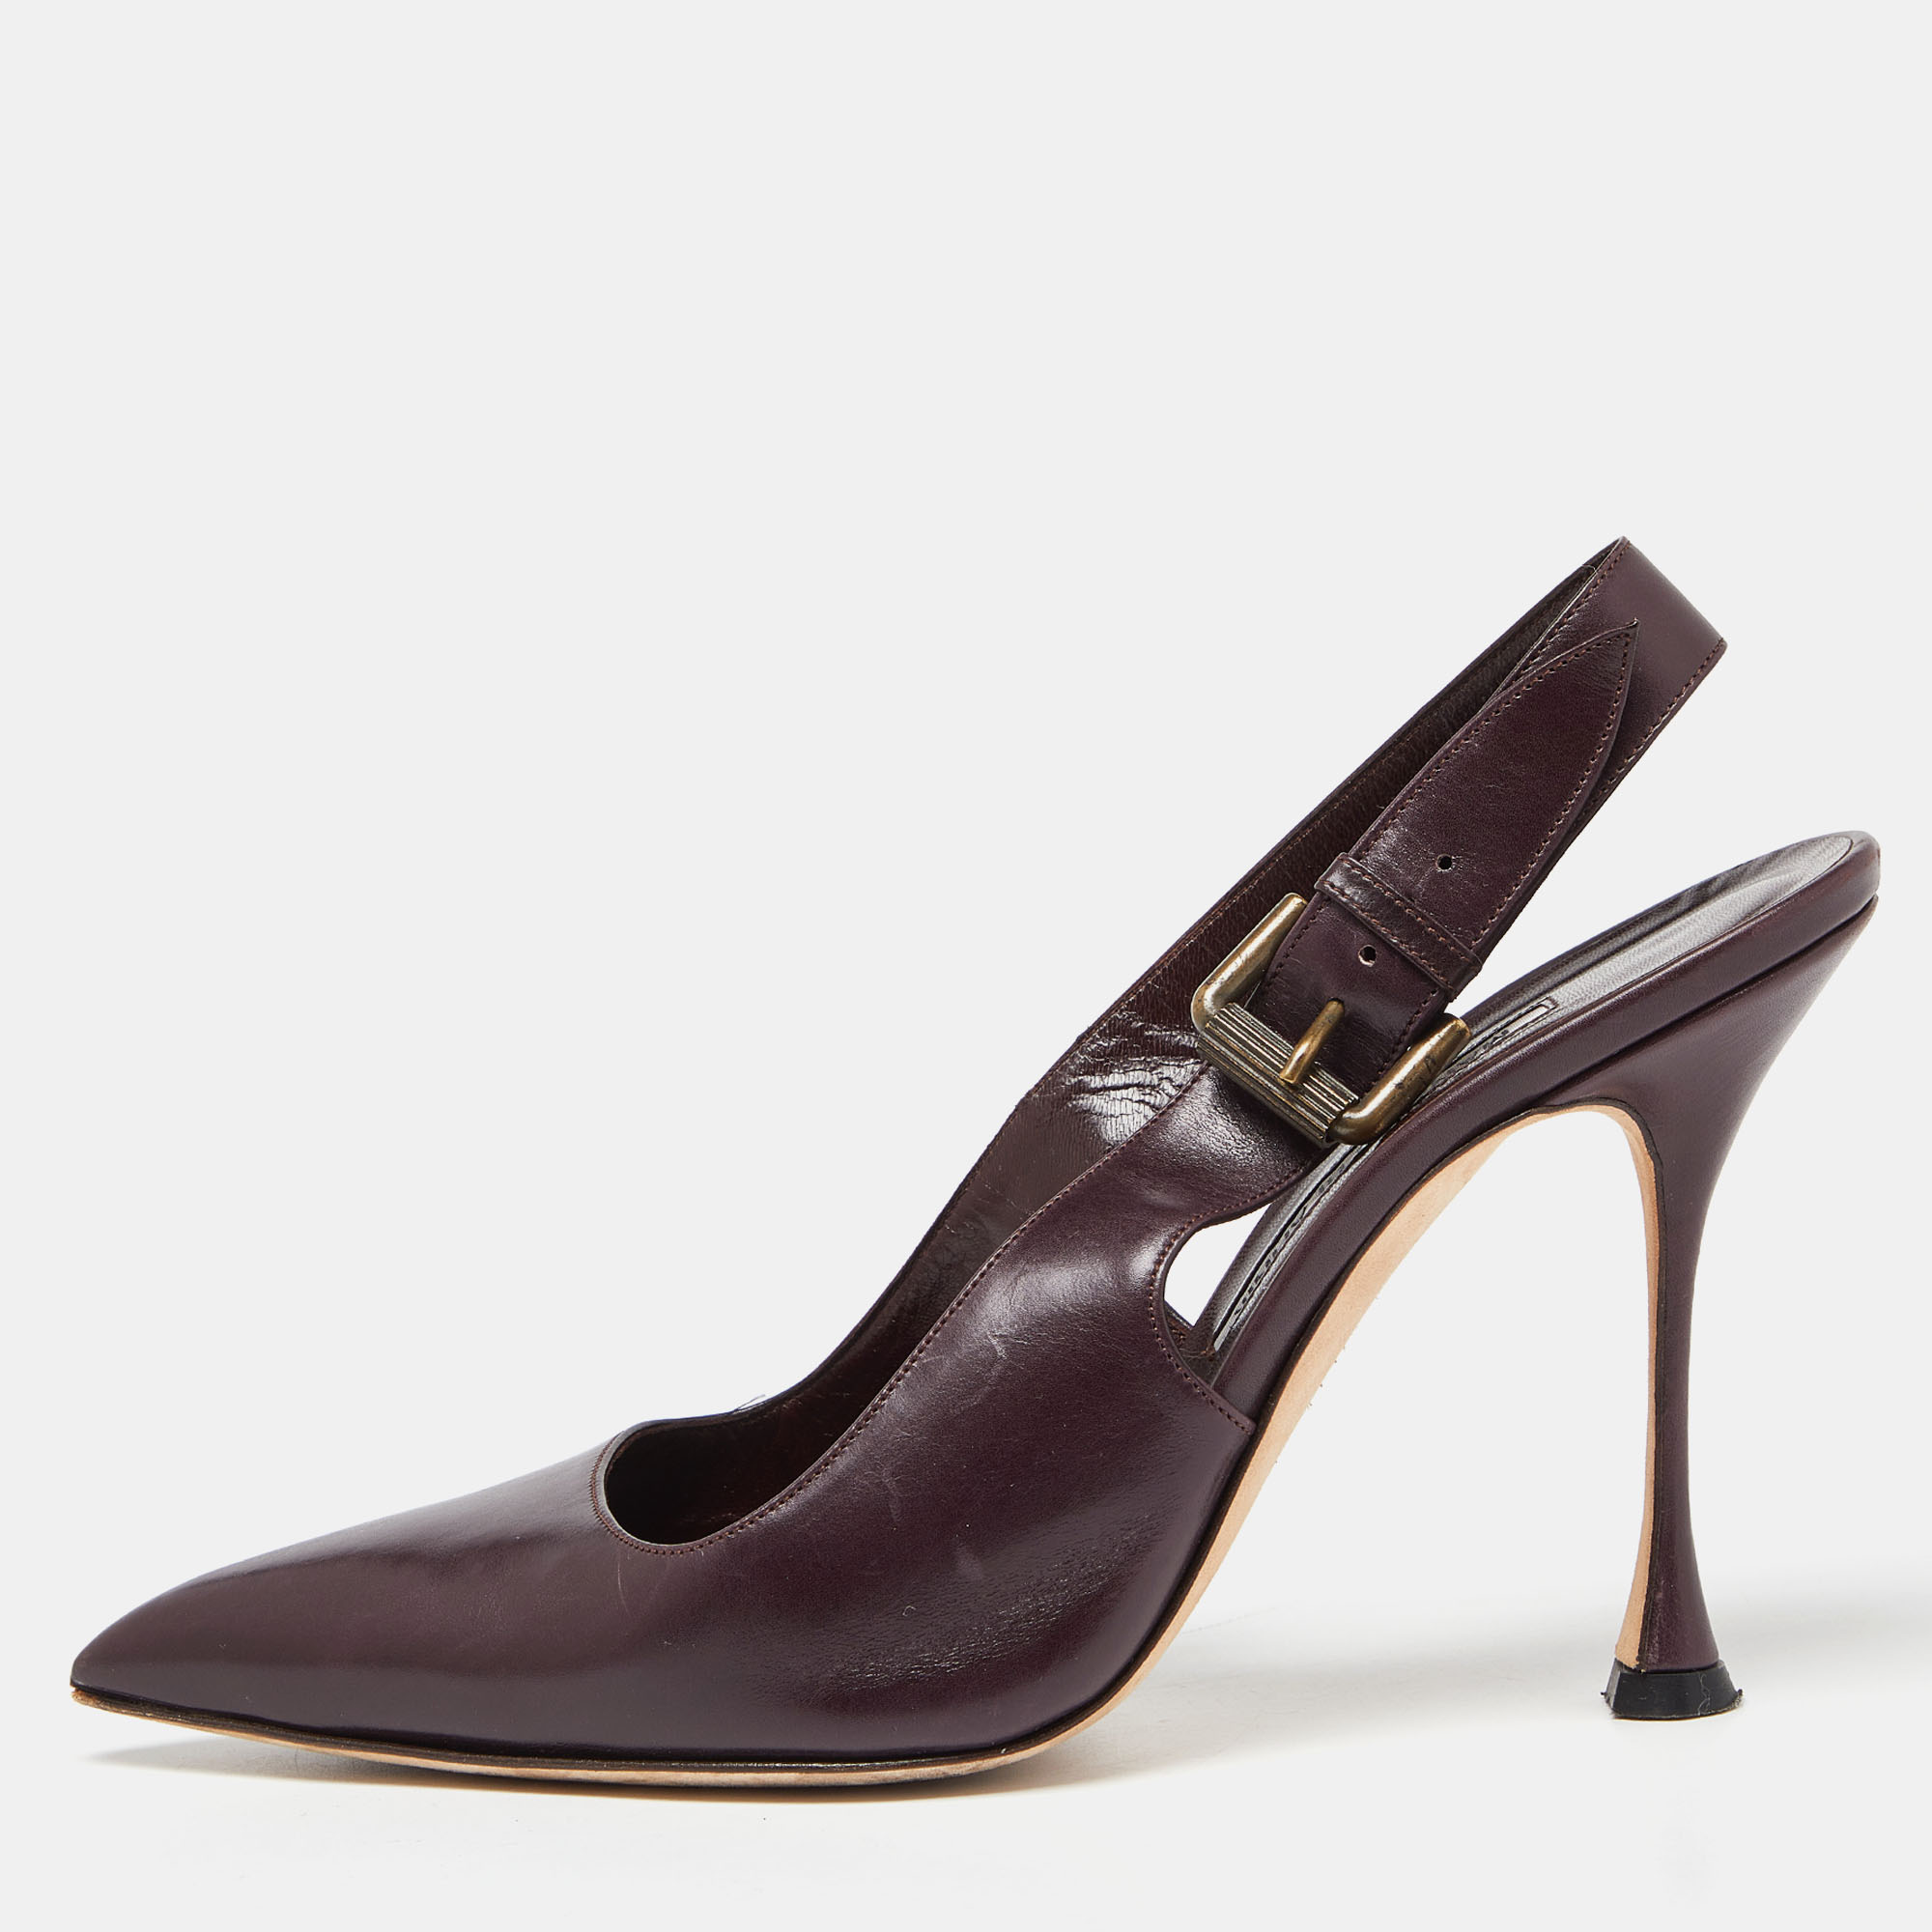 Your elegant feet deserve the best and what better than these pumps from Manolo Blahnik. The regal sandals are crafted from leather and designed with slingbacks closed pointed toes and 10.5cm heels. Flaunt the pair with your dresses and pantsuits.